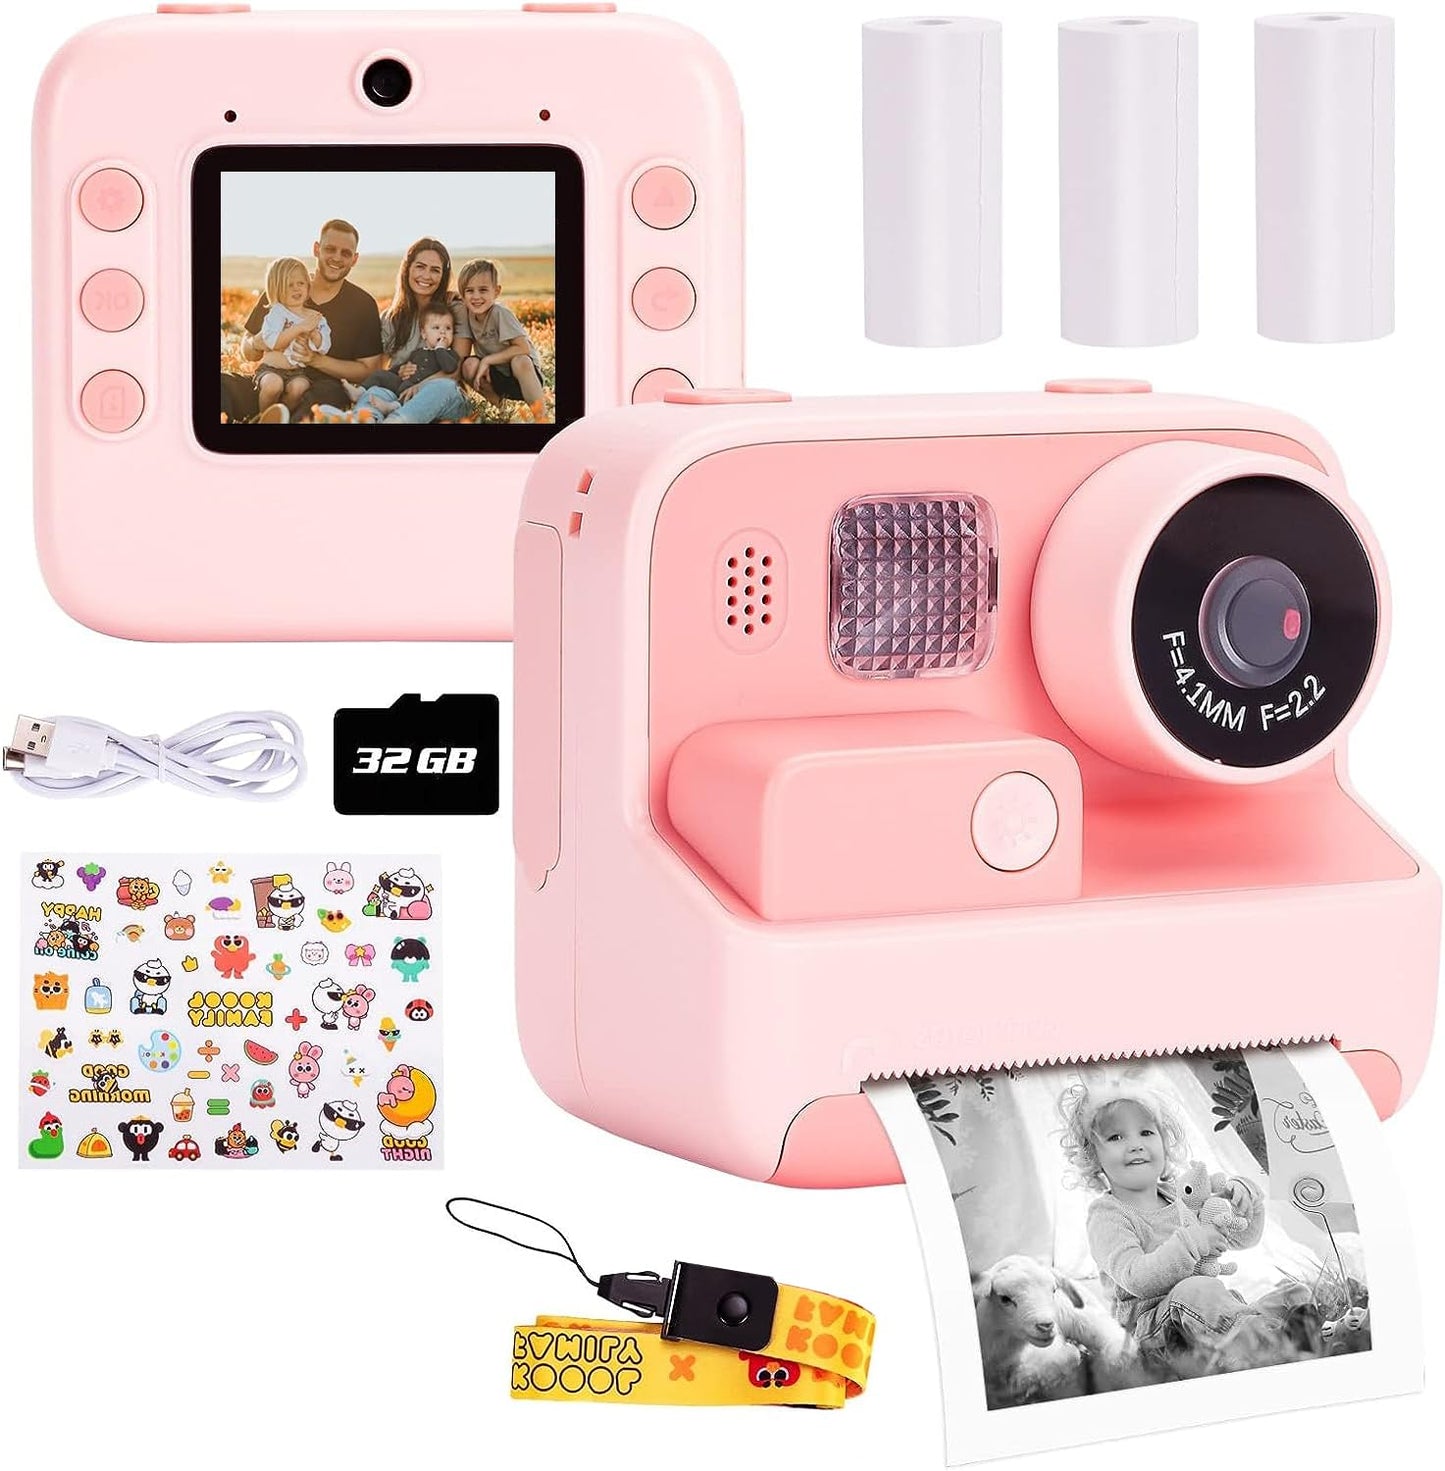 Kids Camera,Instant Print Camera with 32GB Card,48MP 1080P HD Video Camera,Digital Camera with Zero Ink, Toys Gifts for Girls Boys Aged 3-12